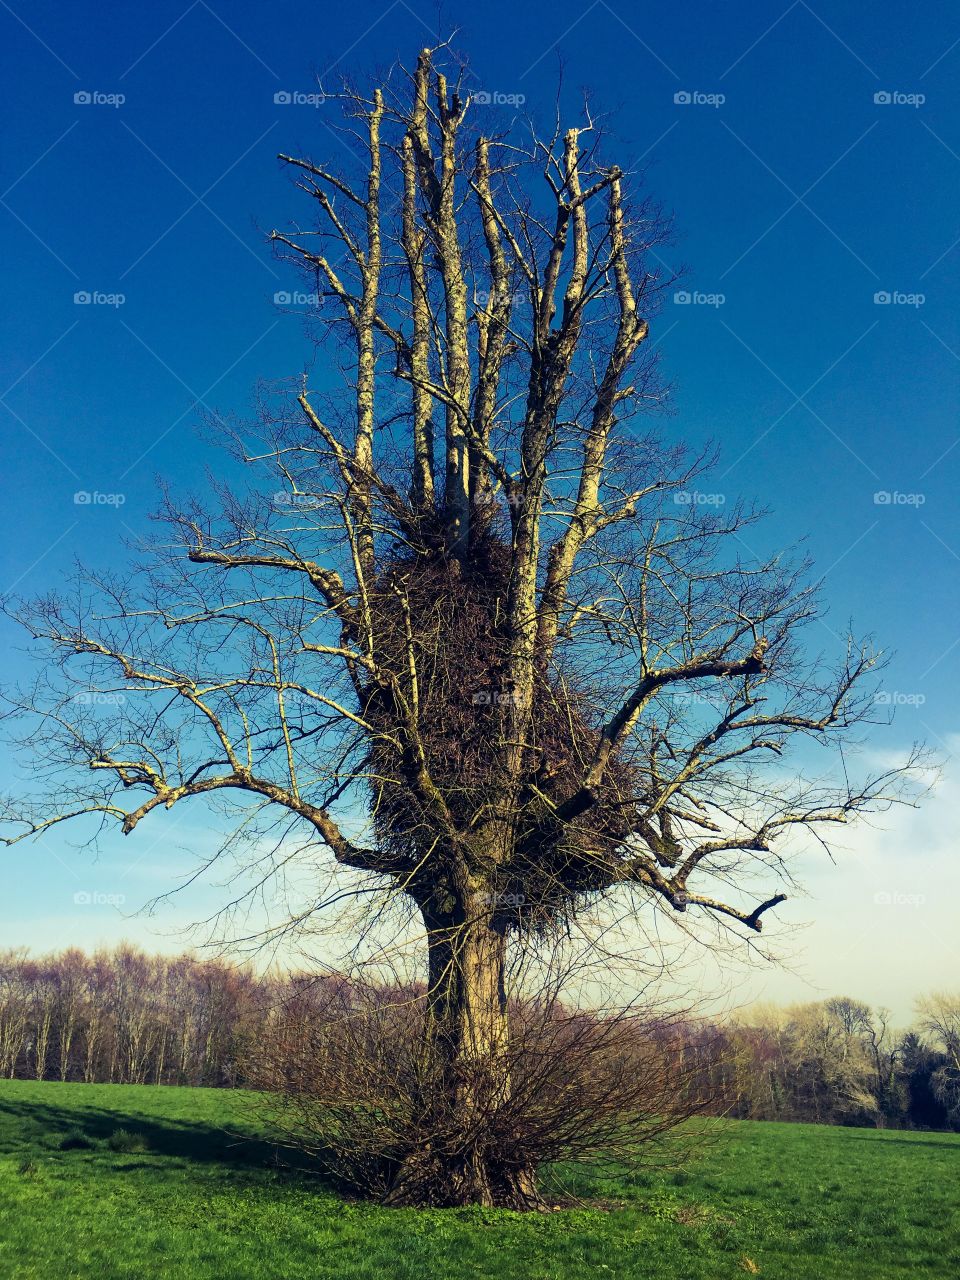 Tree without leaves in a meadow, mid April, Arundel, England 